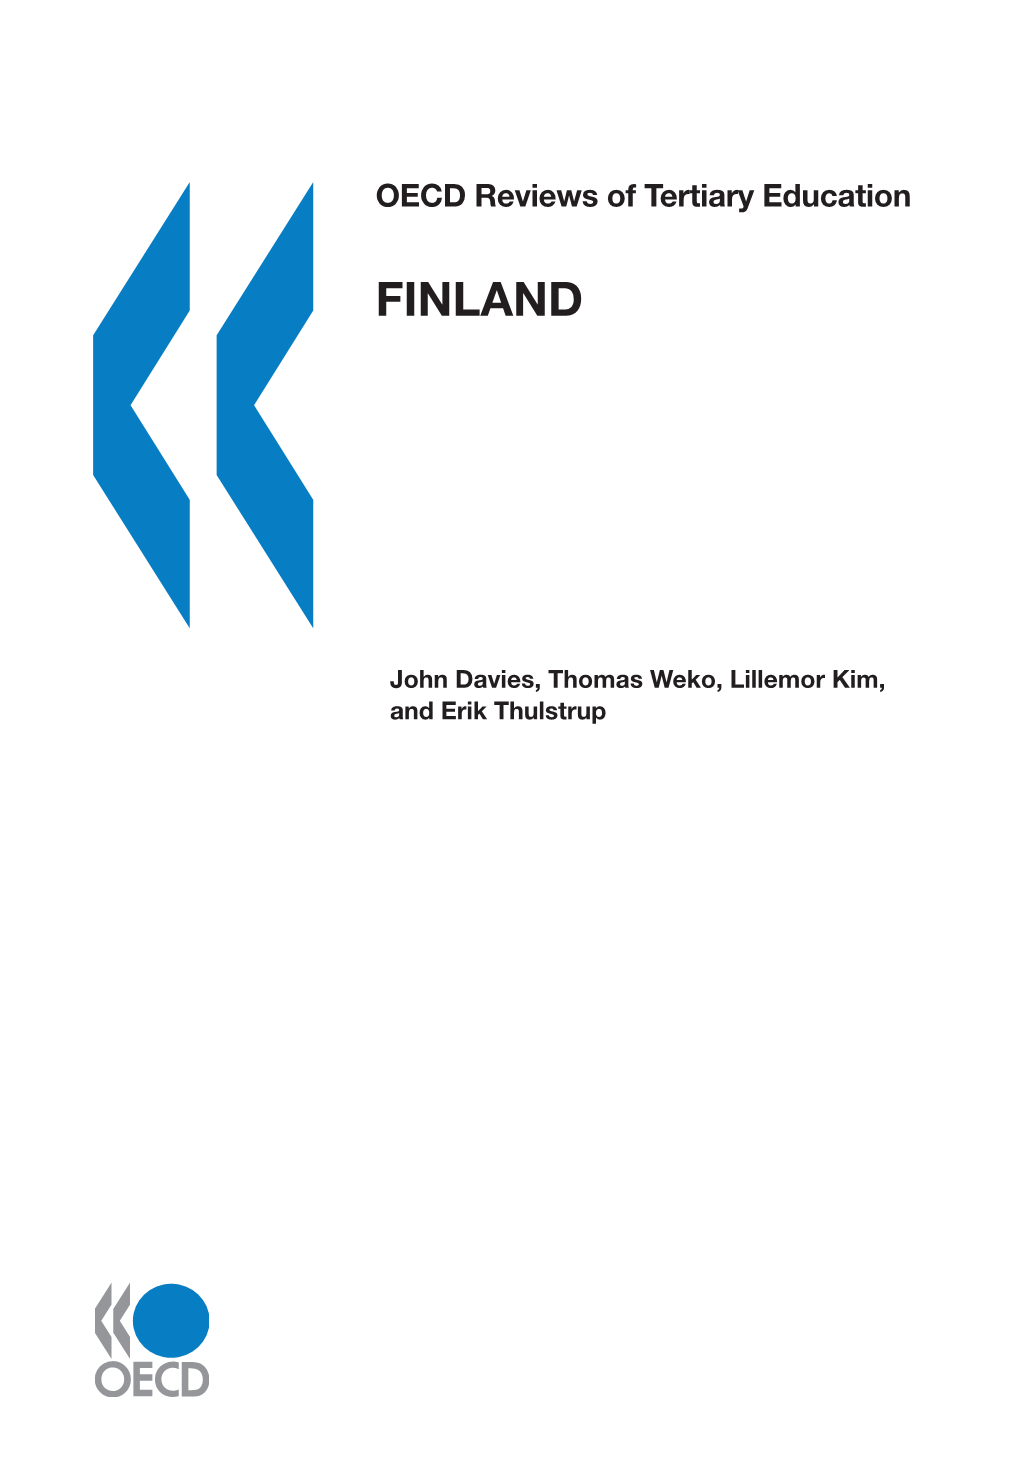 OECD Reviews of Tertiary Education: Finland